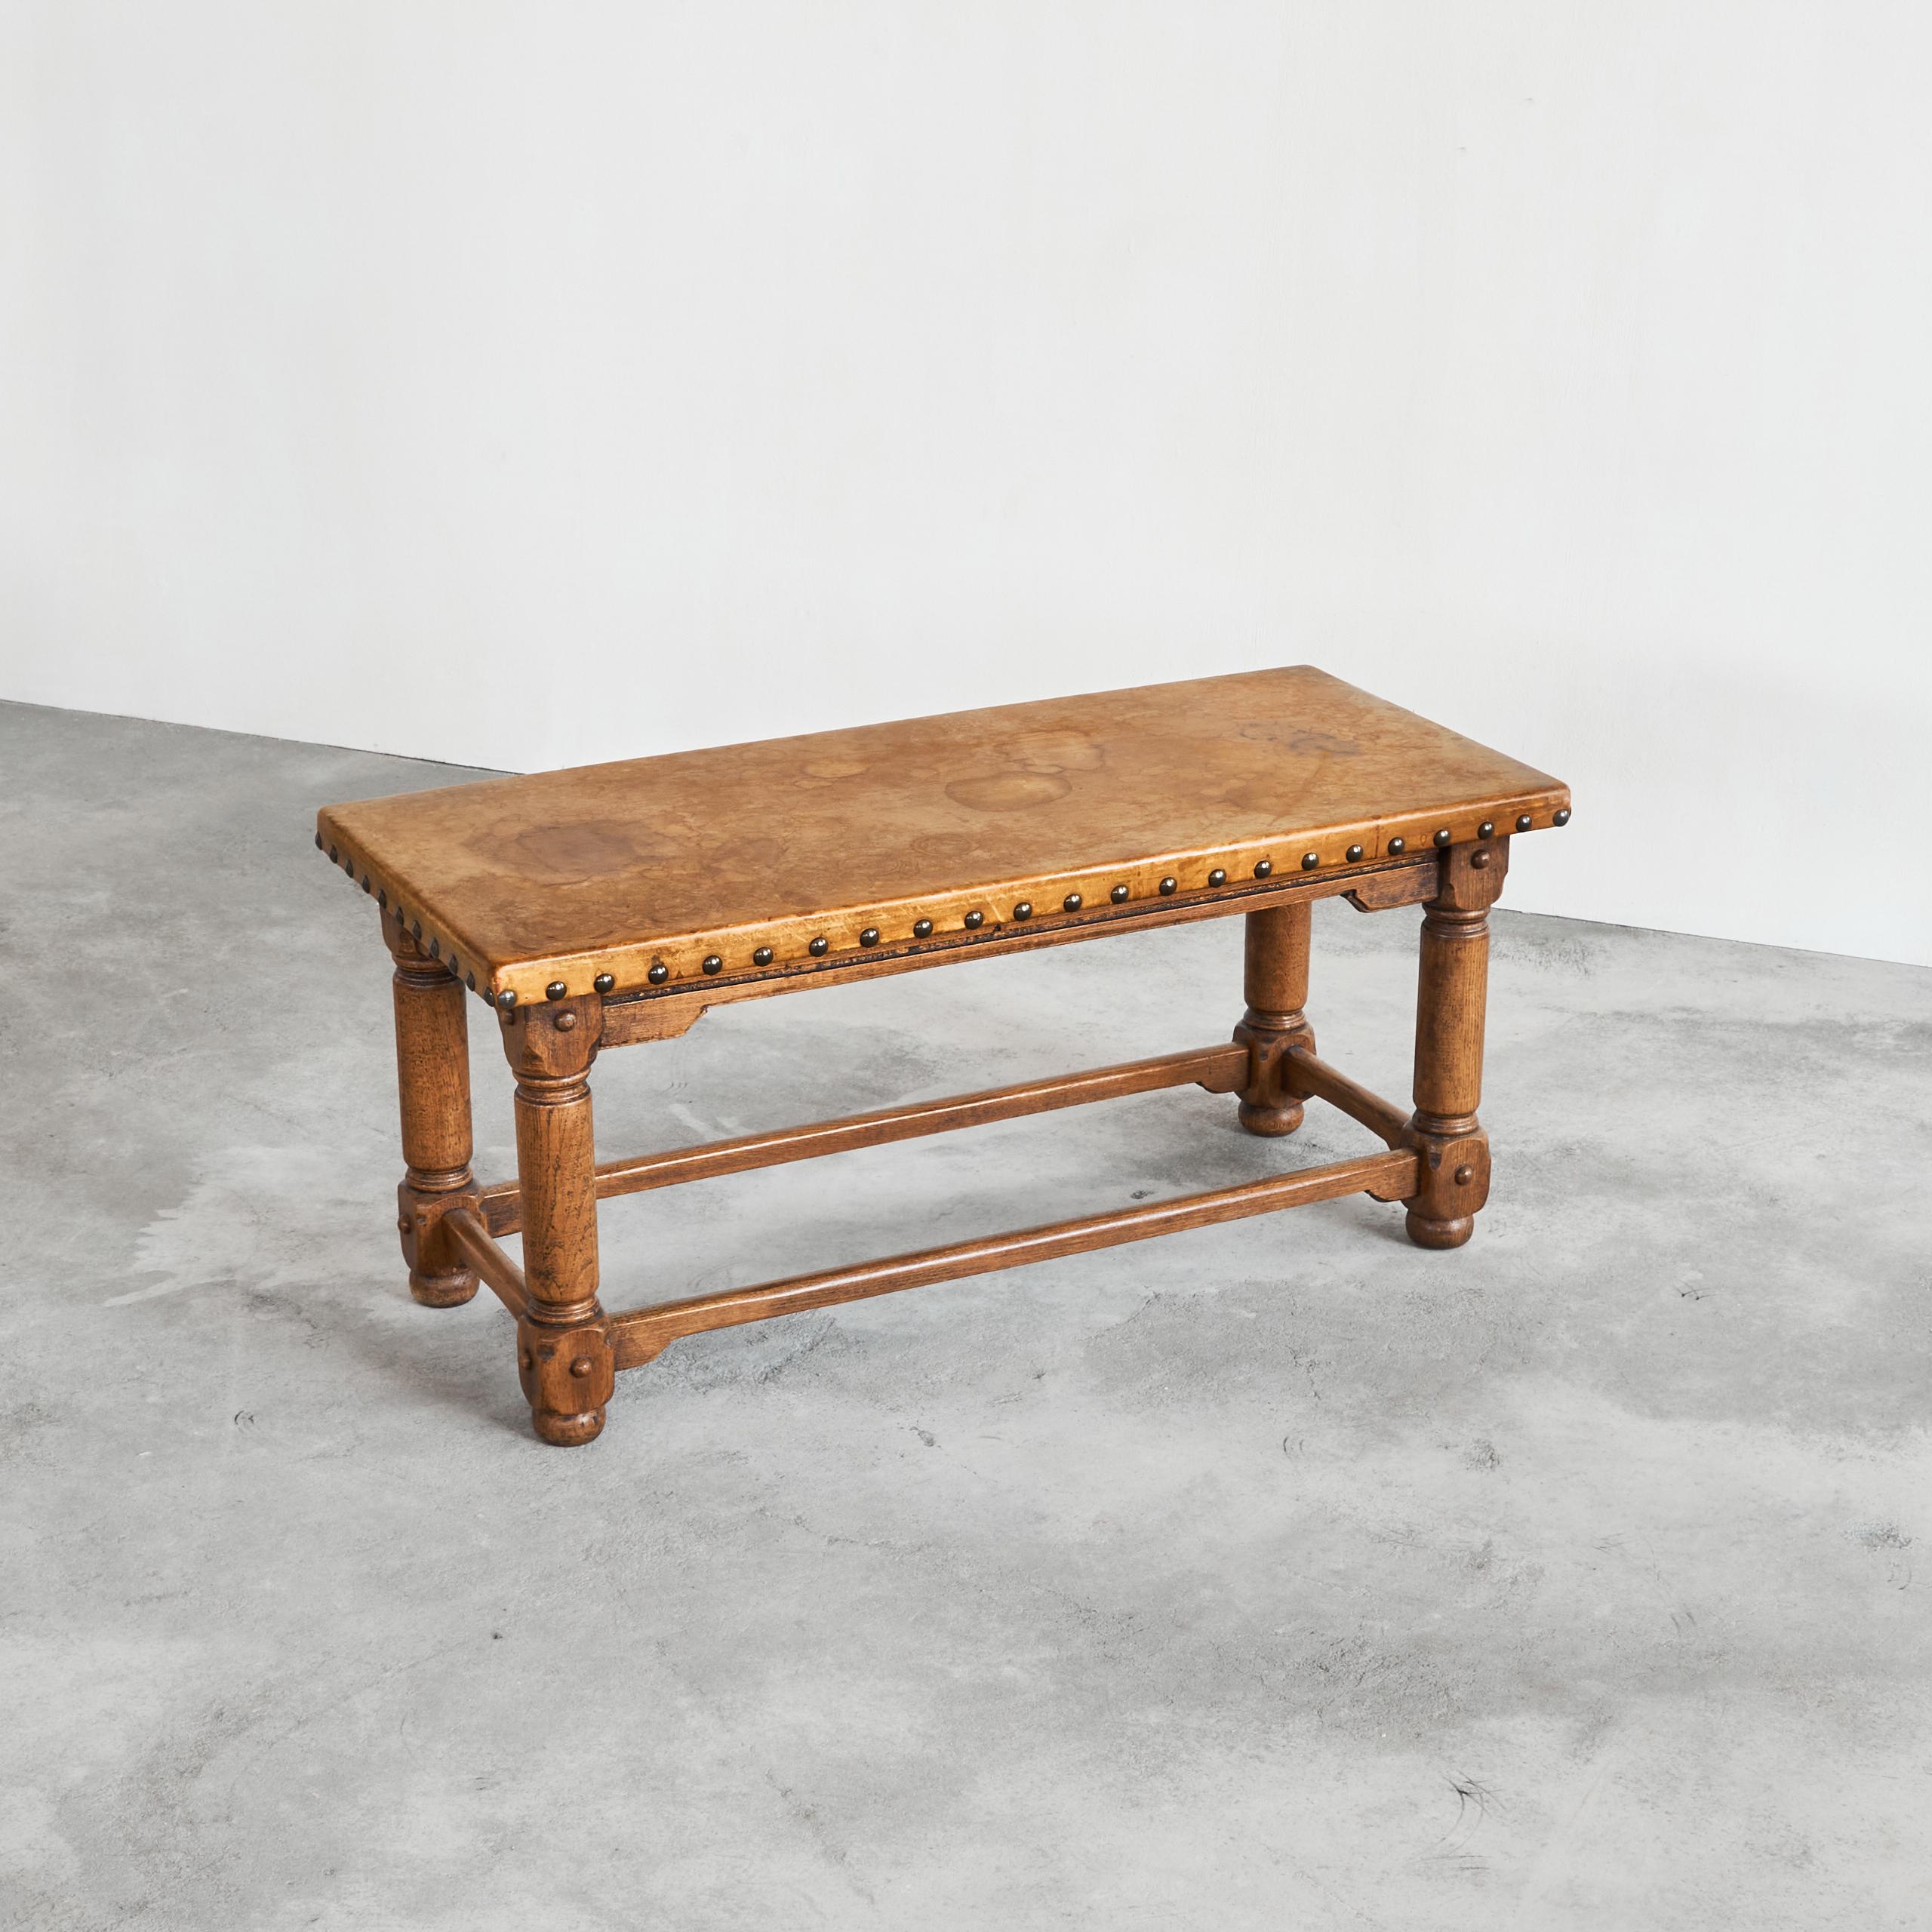 Hand-Crafted Spanish Brutalist Coffee Table in Solid Oak, Metal and Patinated Leather 1940s For Sale